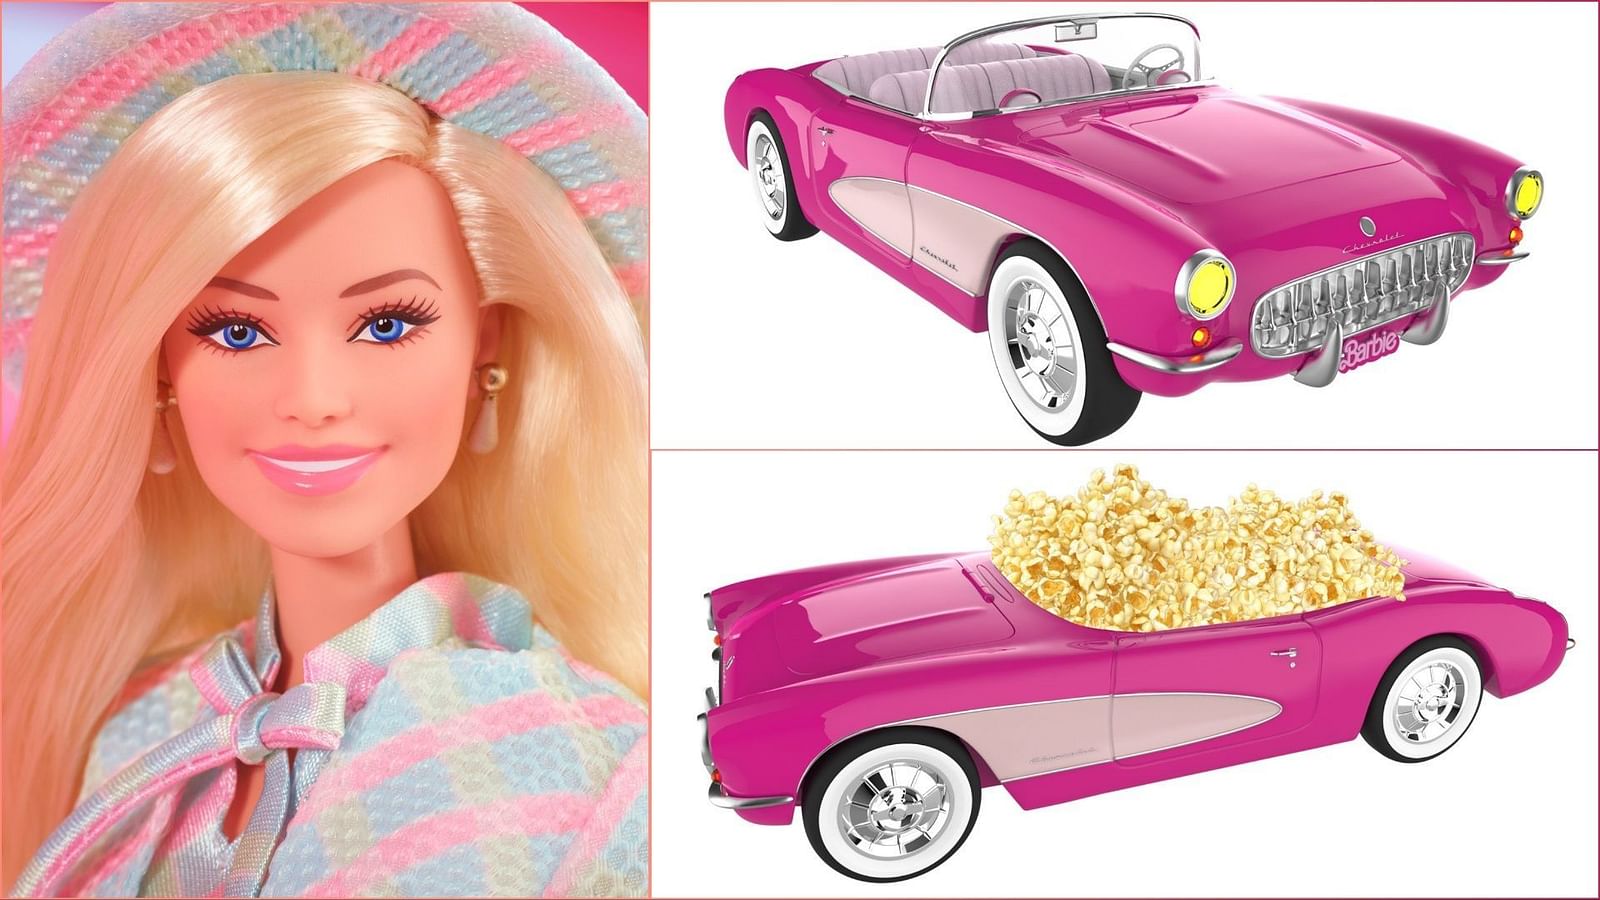 AMC Barbie popcorn bucket How to get, price, and all you need to know